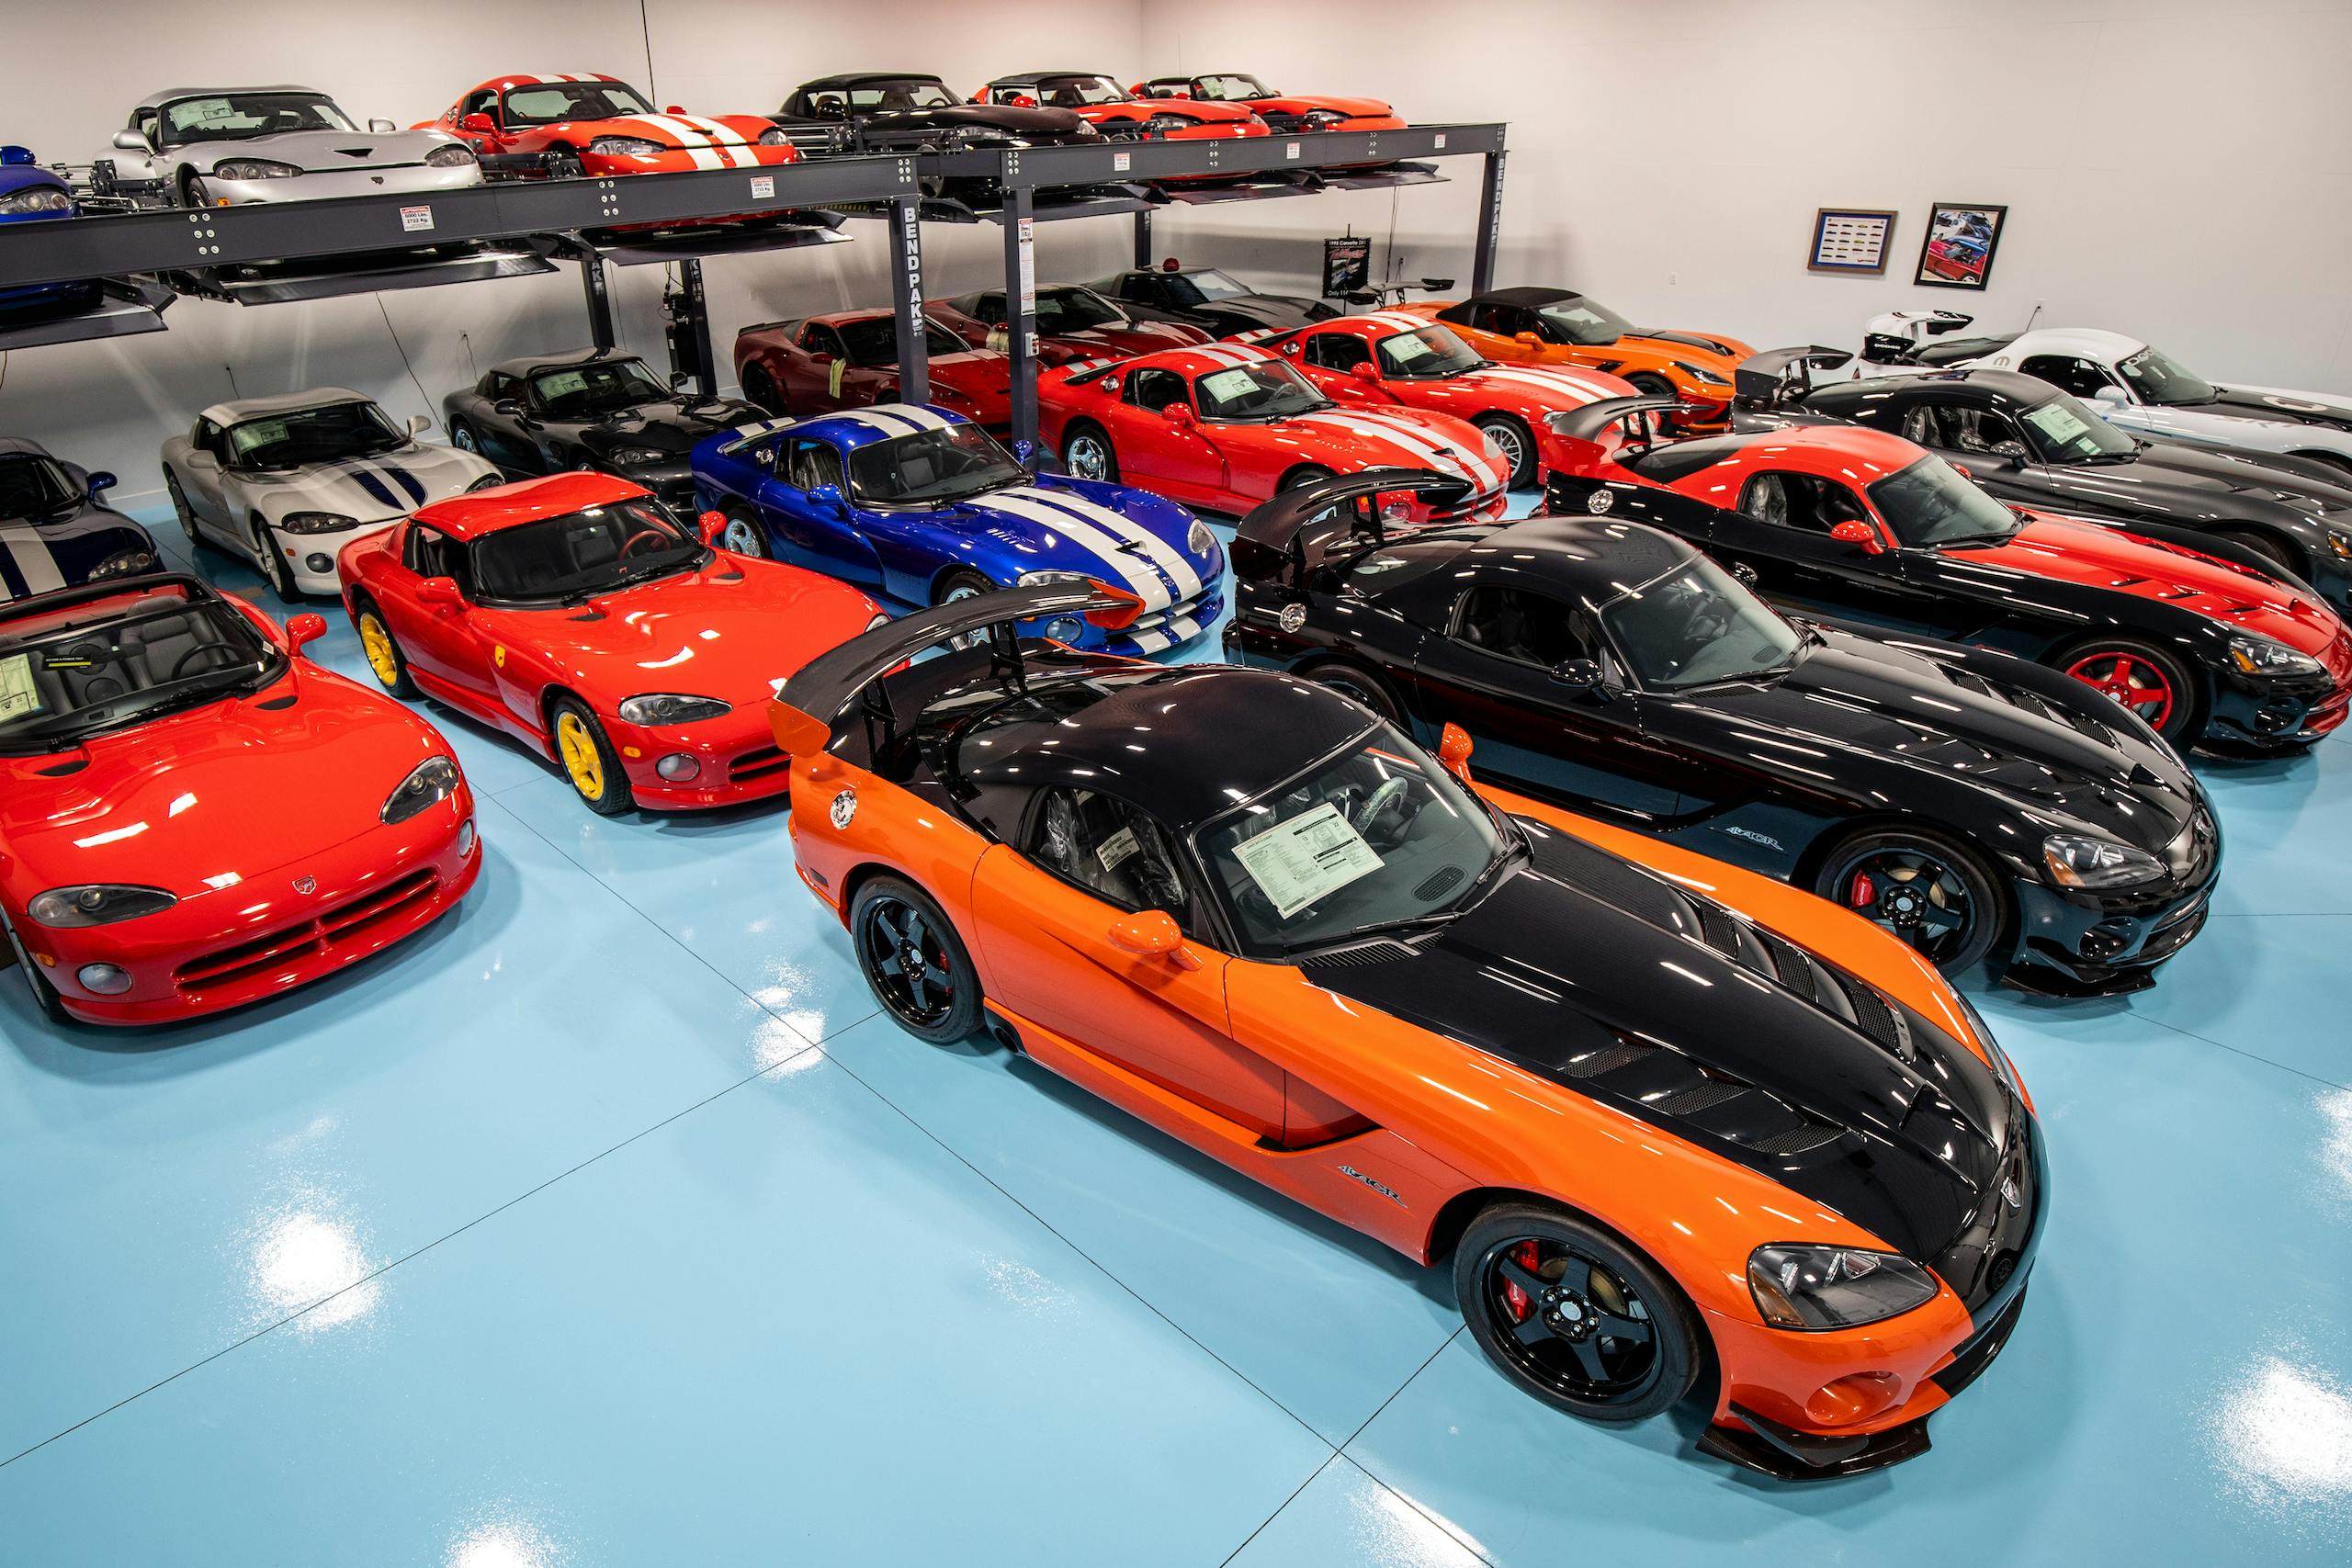 Viper collection wide